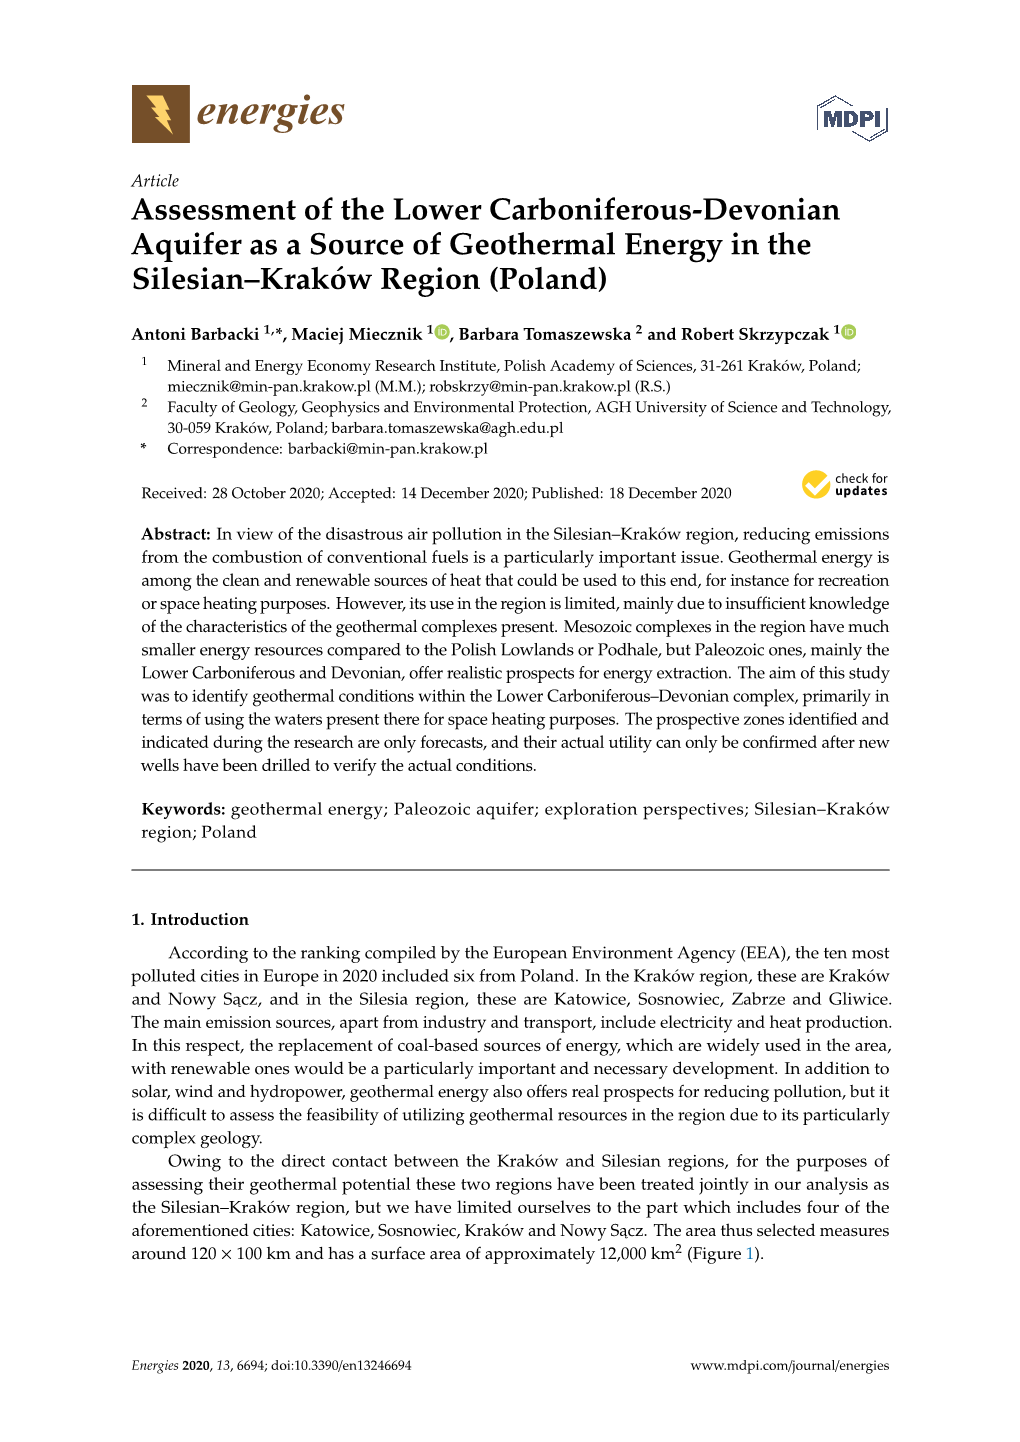 Assessment of the Lower Carboniferous-Devonian Aquifer As a Source of Geothermal Energy in the Silesian–Kraków Region (Poland)